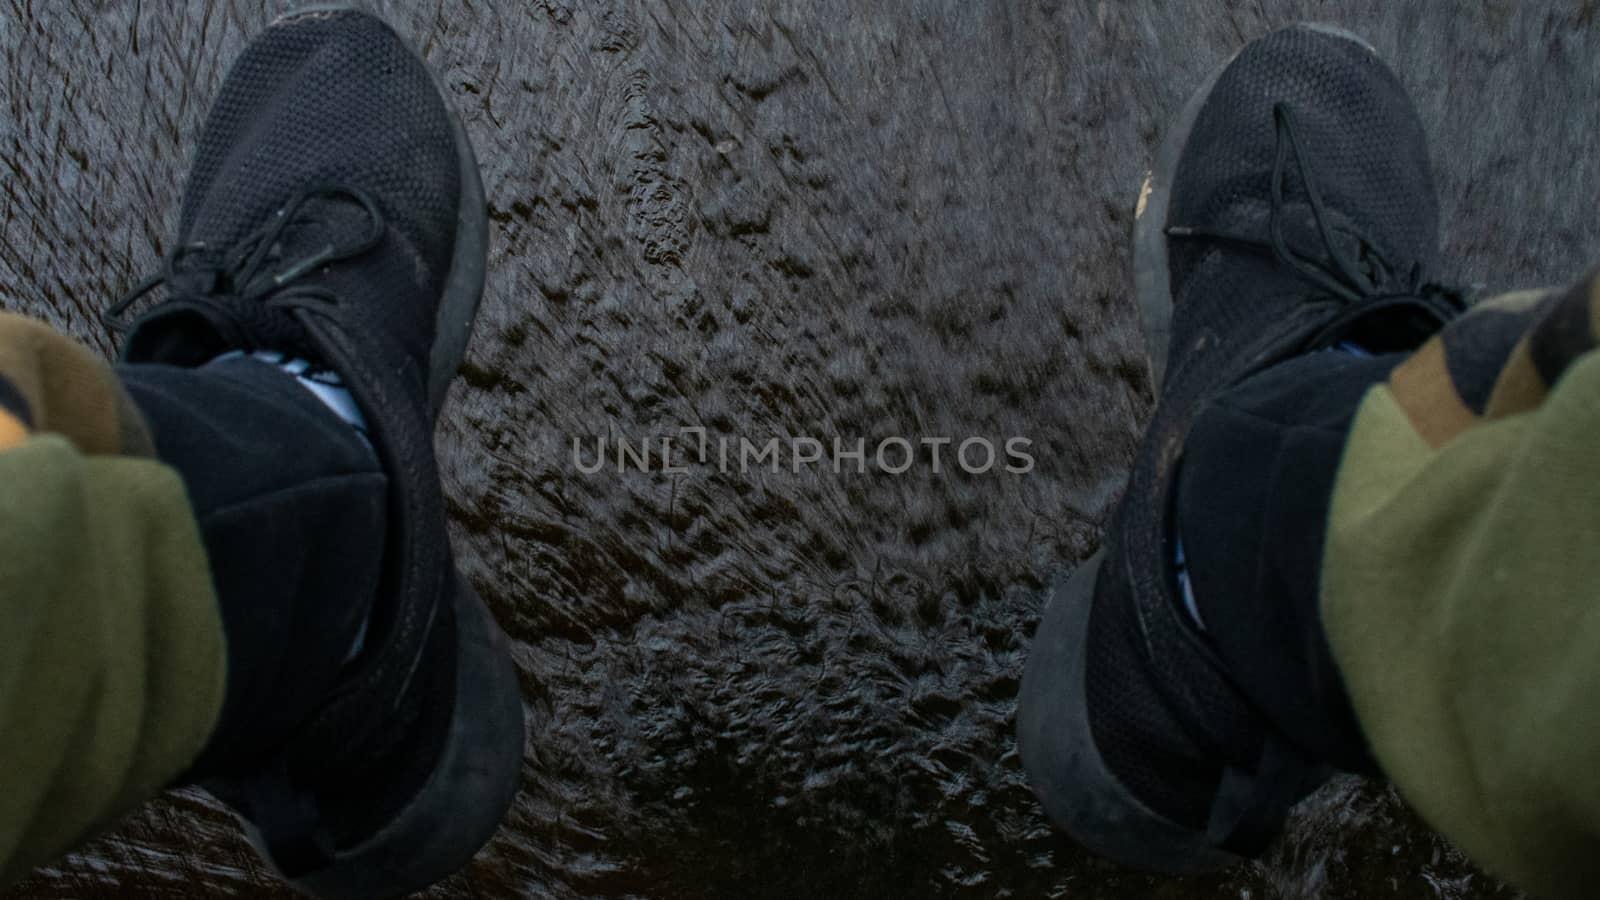 A Man's Feet in Black Shoes Dangling Over Running Water by bju12290